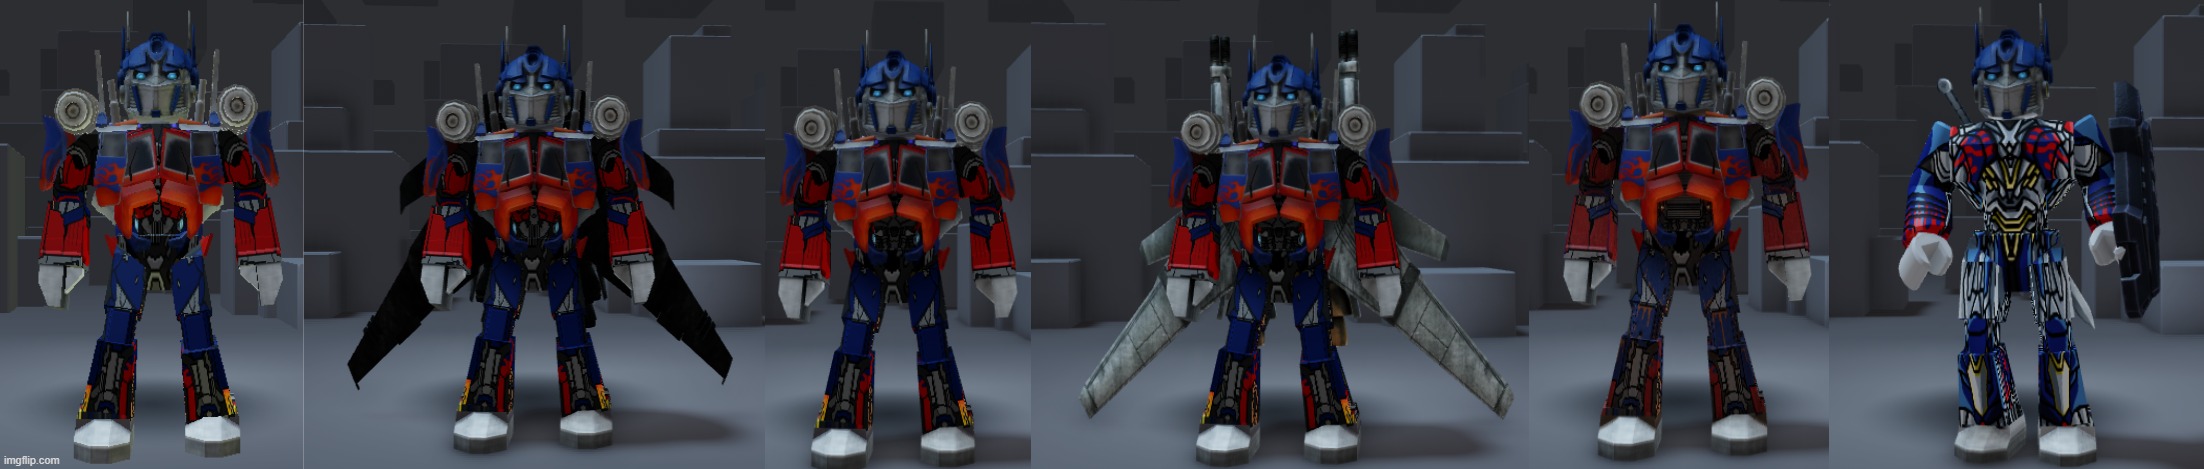 My Optimus Prime Avatars | image tagged in roblox | made w/ Imgflip meme maker